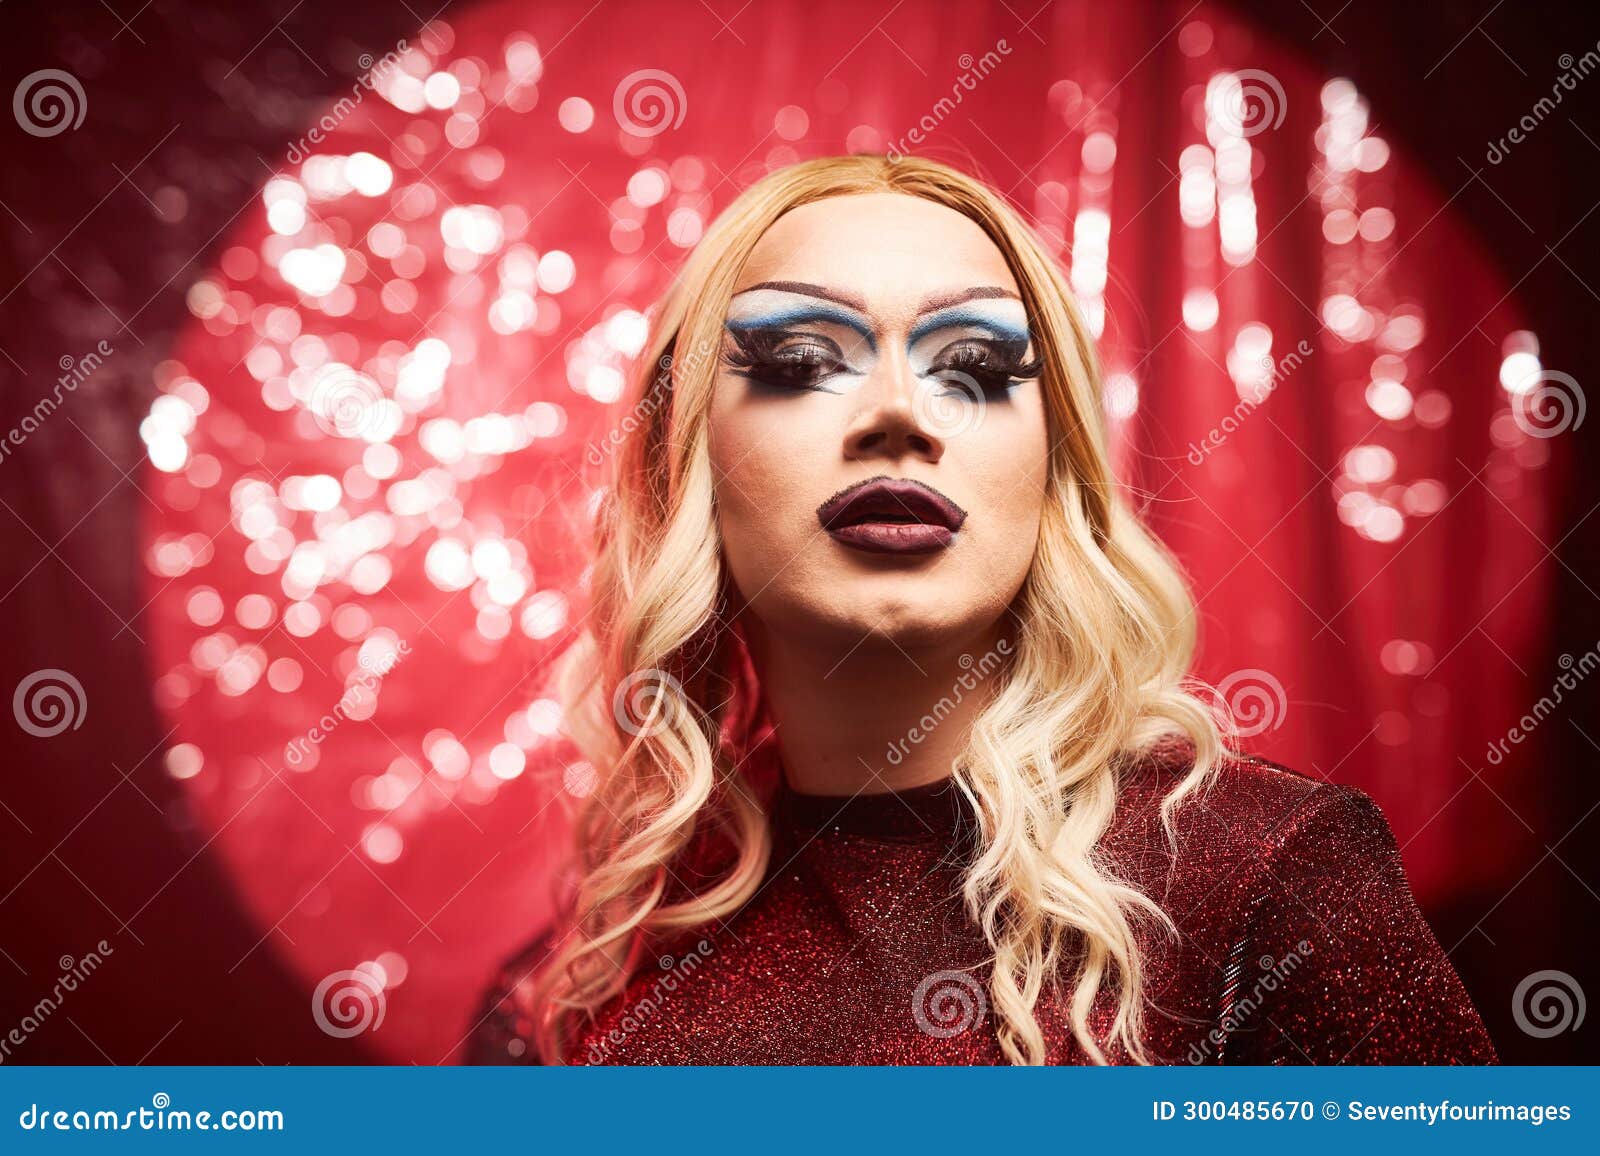 portrait of drag queen on stage